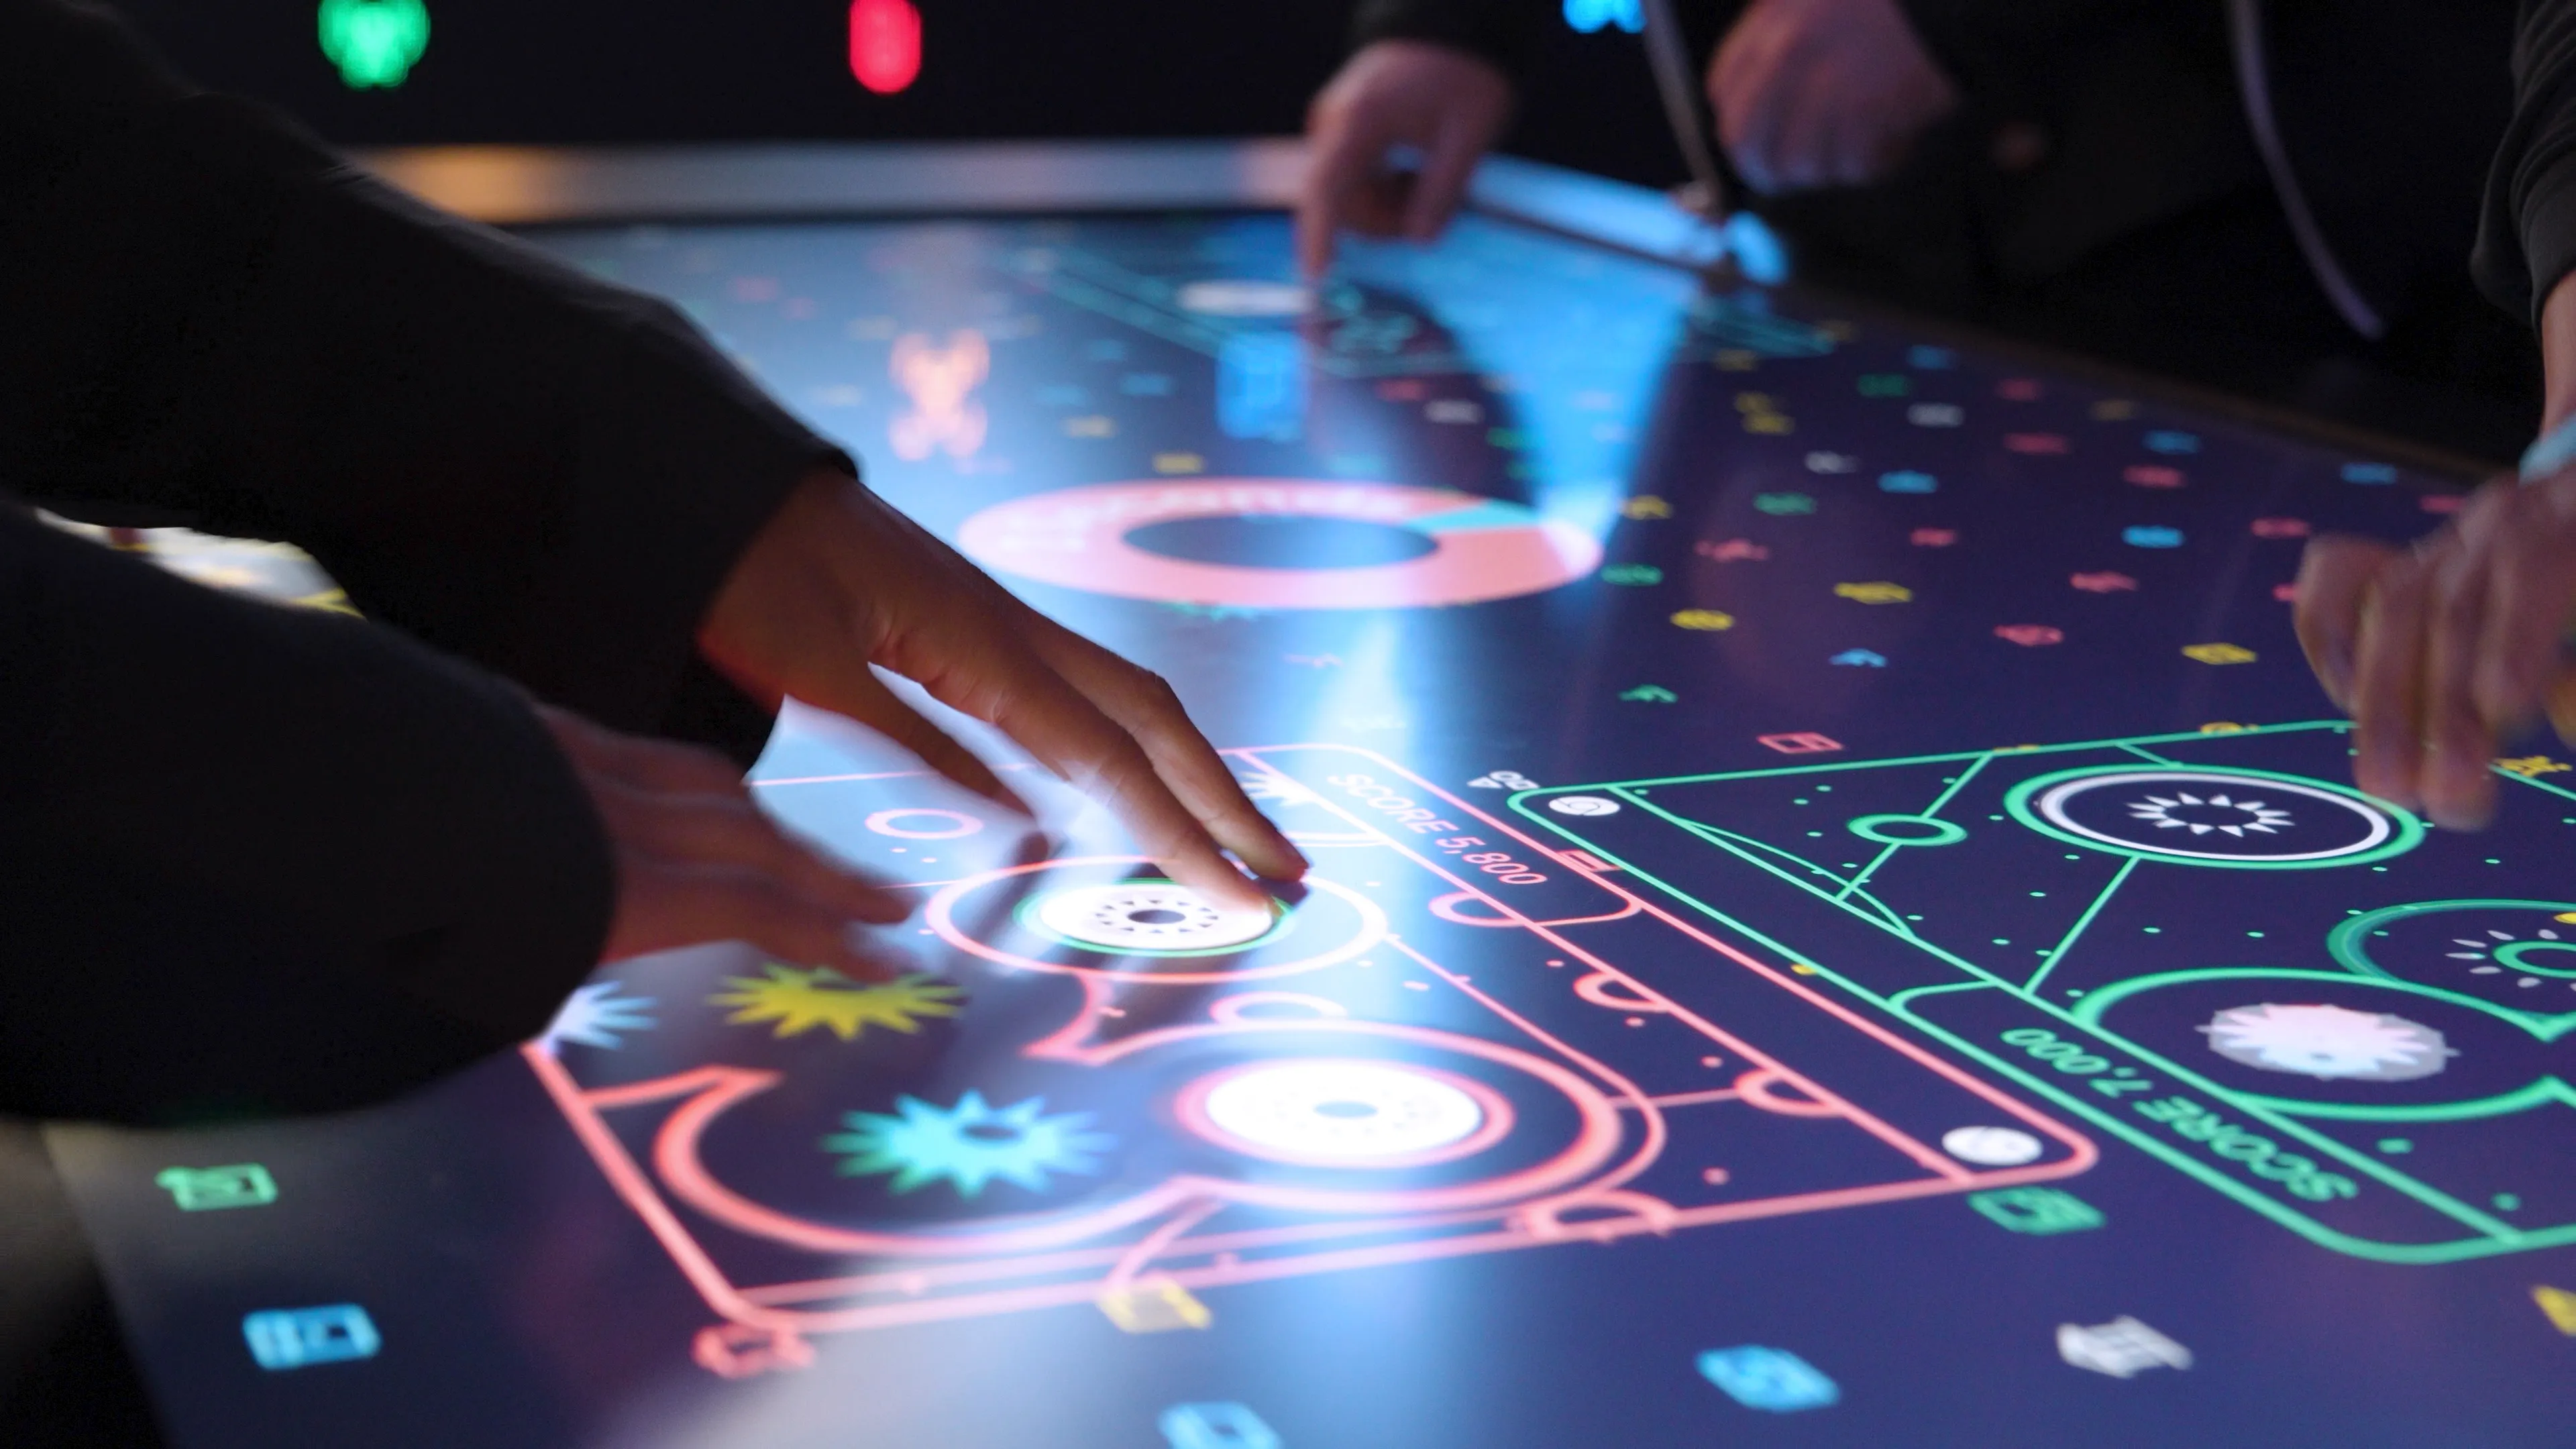 A close-up captures the hands of Bloomberg Technology Summit attendees as they engage with the vibrant Data Defense Game on a touch table. The screen displays stylized Google Chrome windows, where files are actively being scanned for threats.